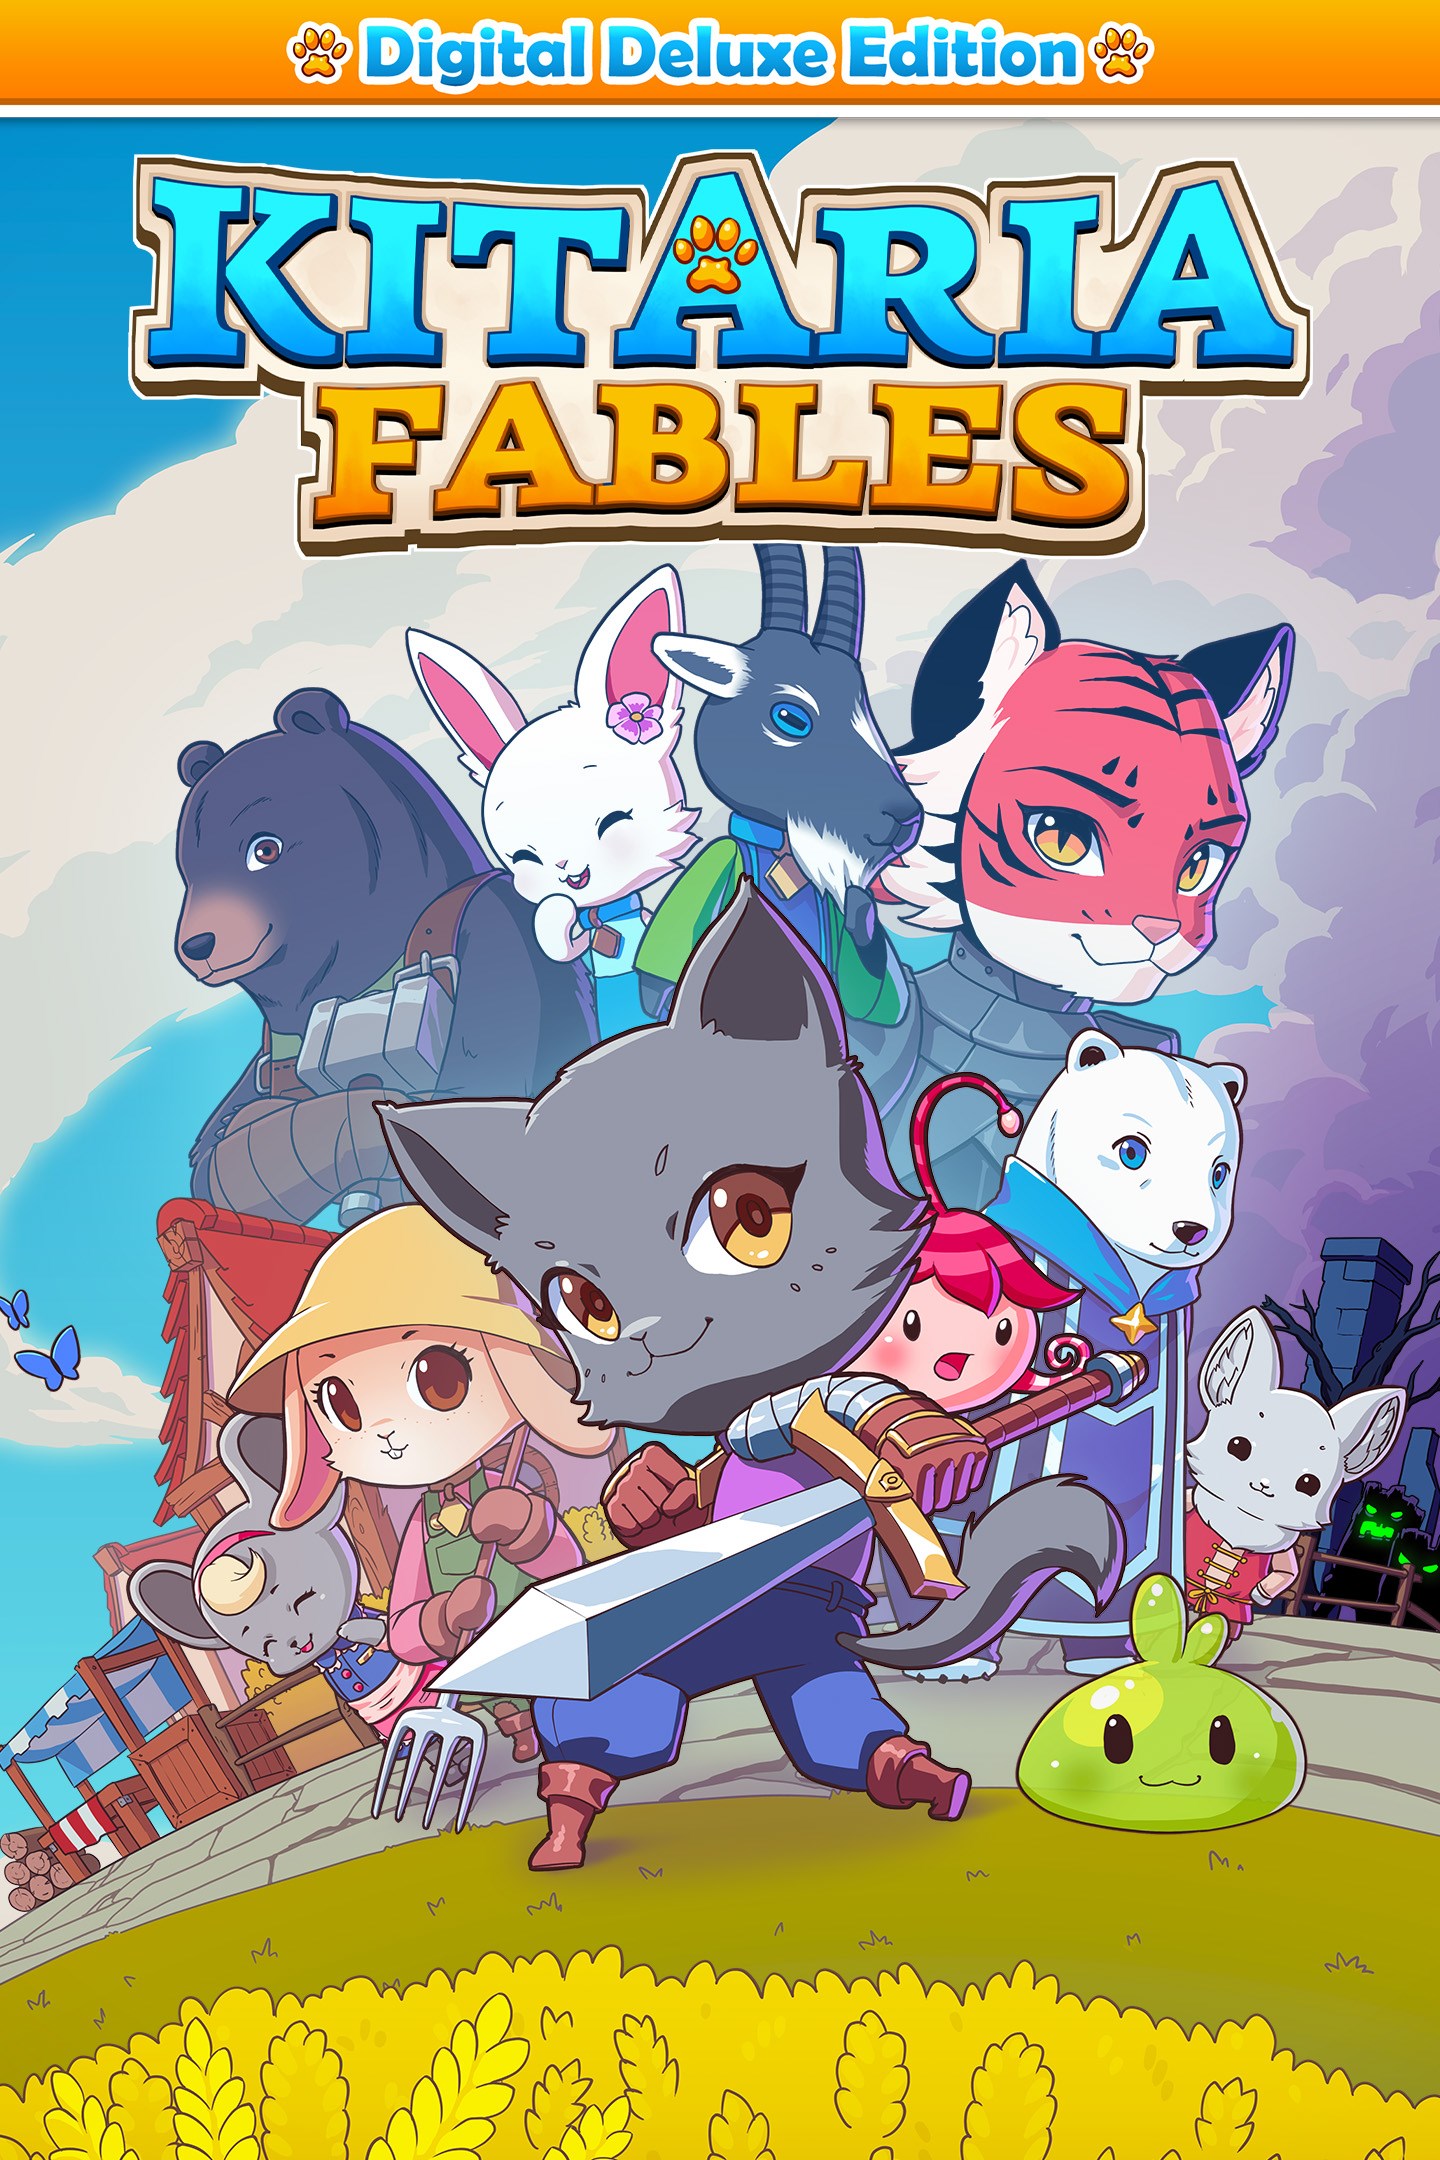 Kitaria Fables: Deluxe Edition boxshot